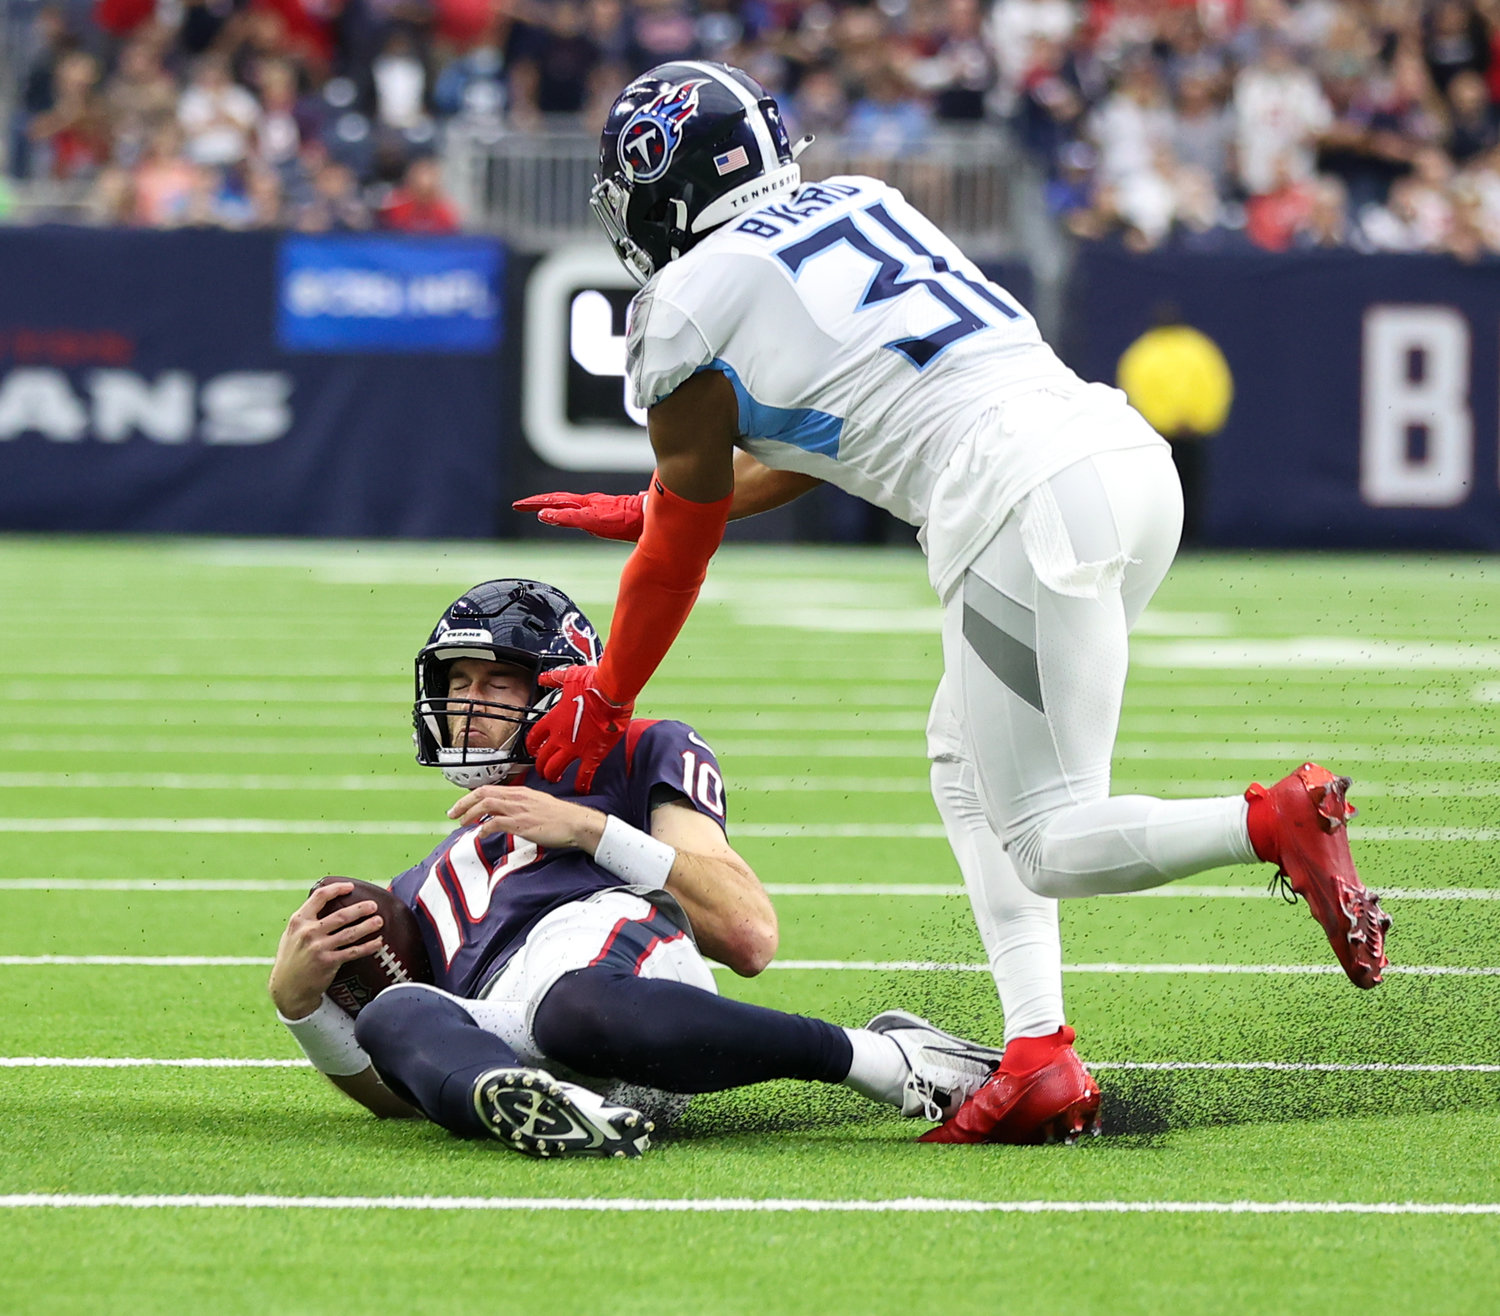 Houston Texans quarterback Davis Mills (10) slides down after gaining a first down during an NFL game between the Texans and the Titans on Jan. 9, 2022 in Houston, Texas. The Titans won, 28-25.